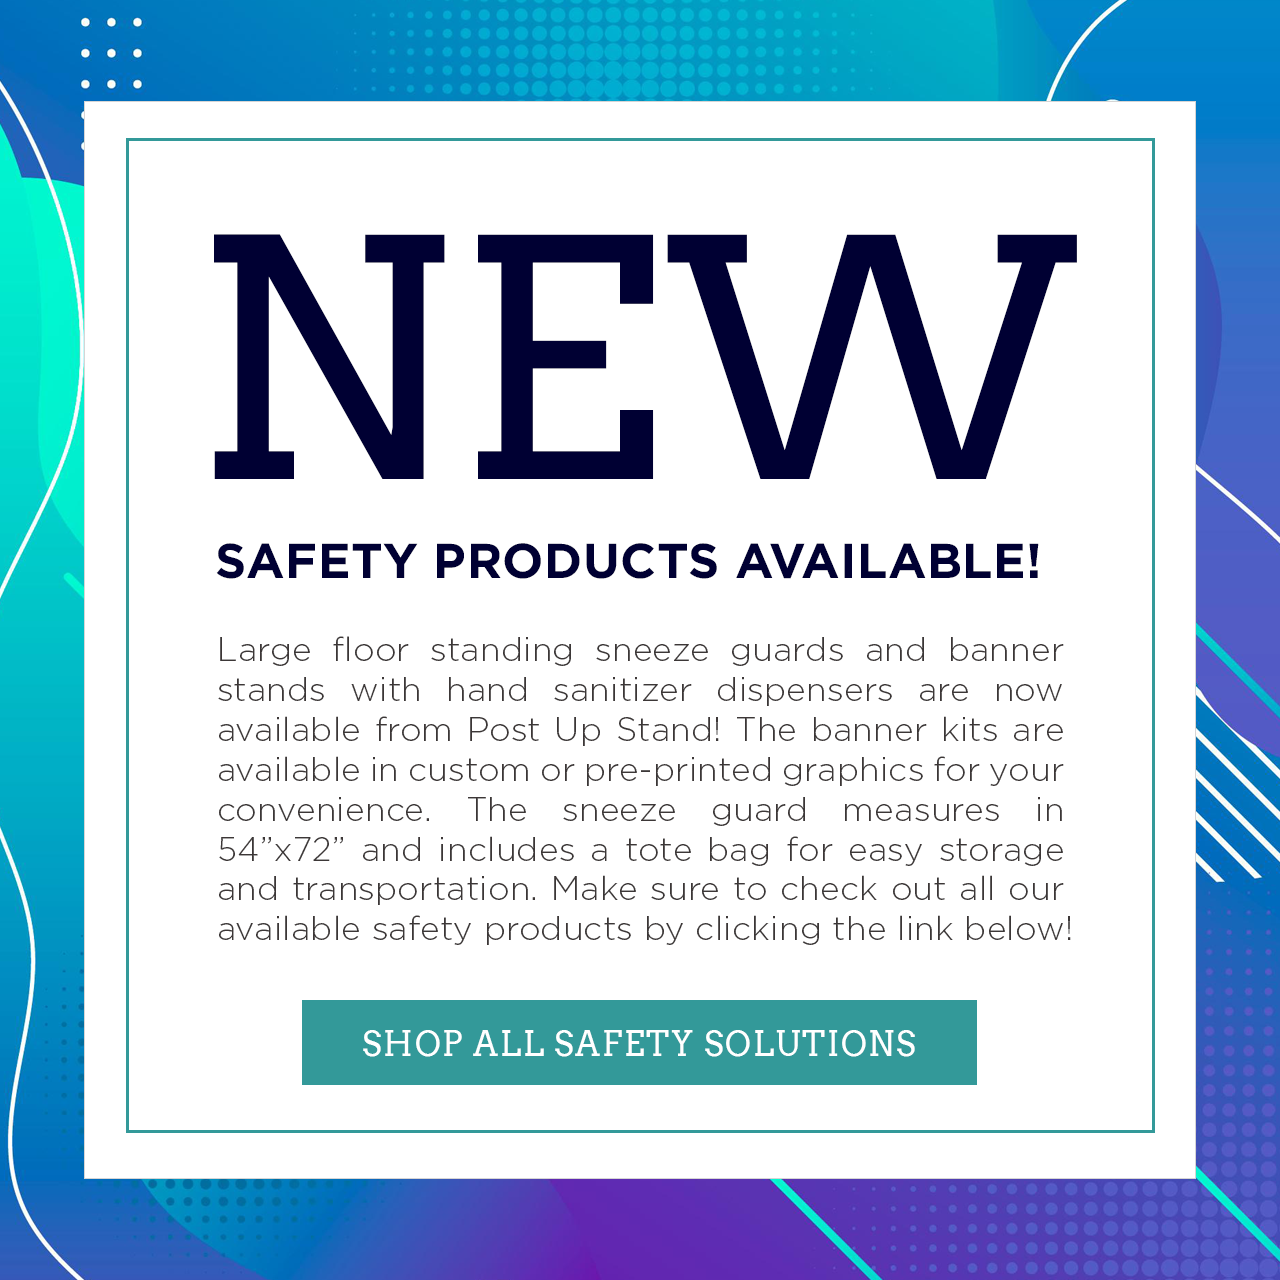 New Banners & Safety Solutions